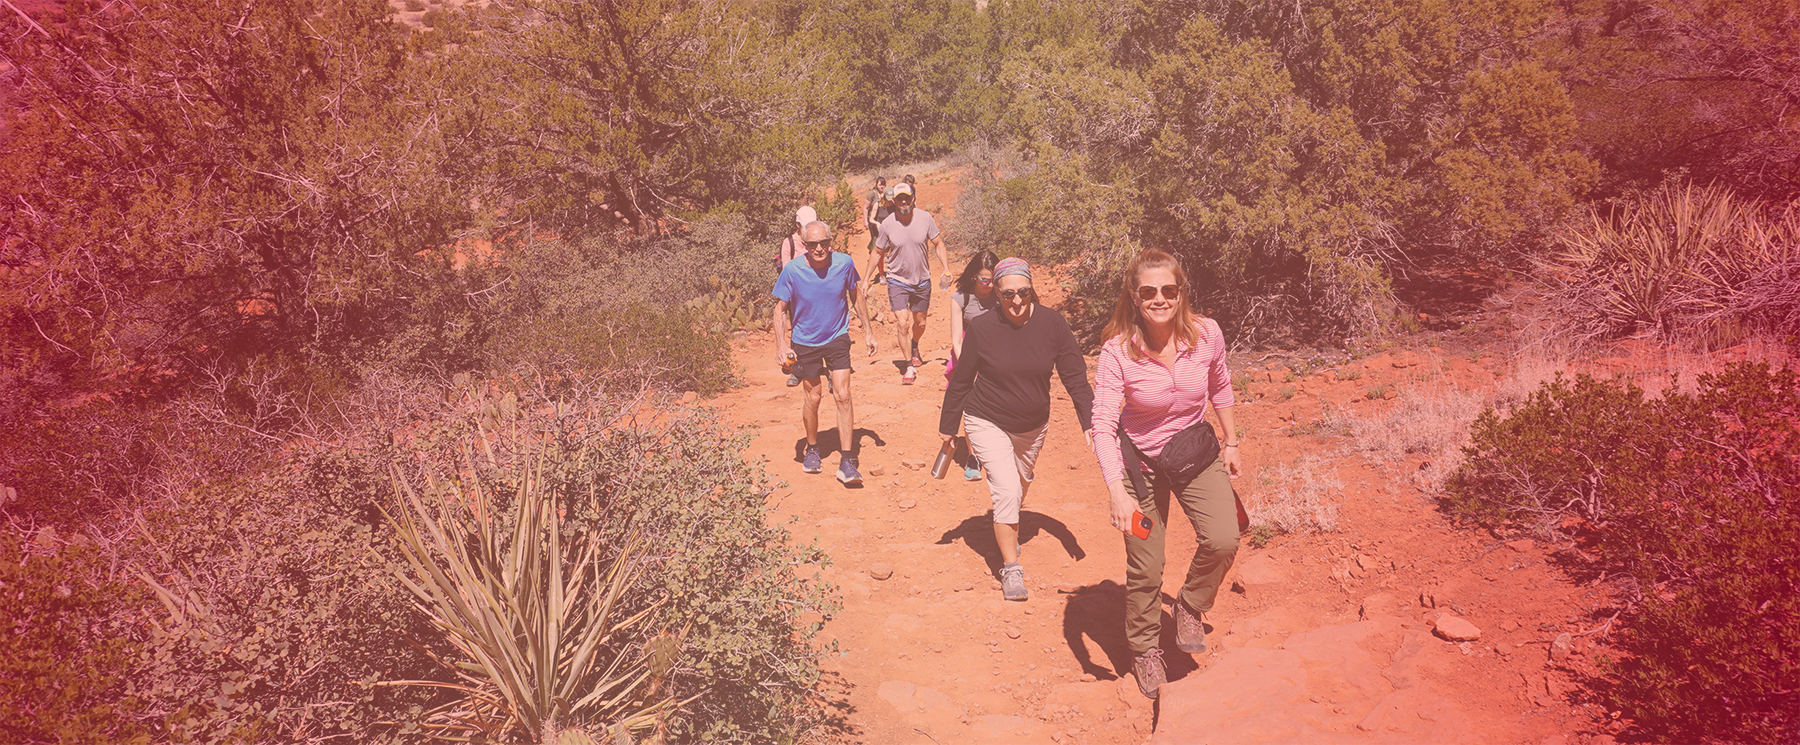 hiking at Tucson yoga retreat during Gem and Mineral Show